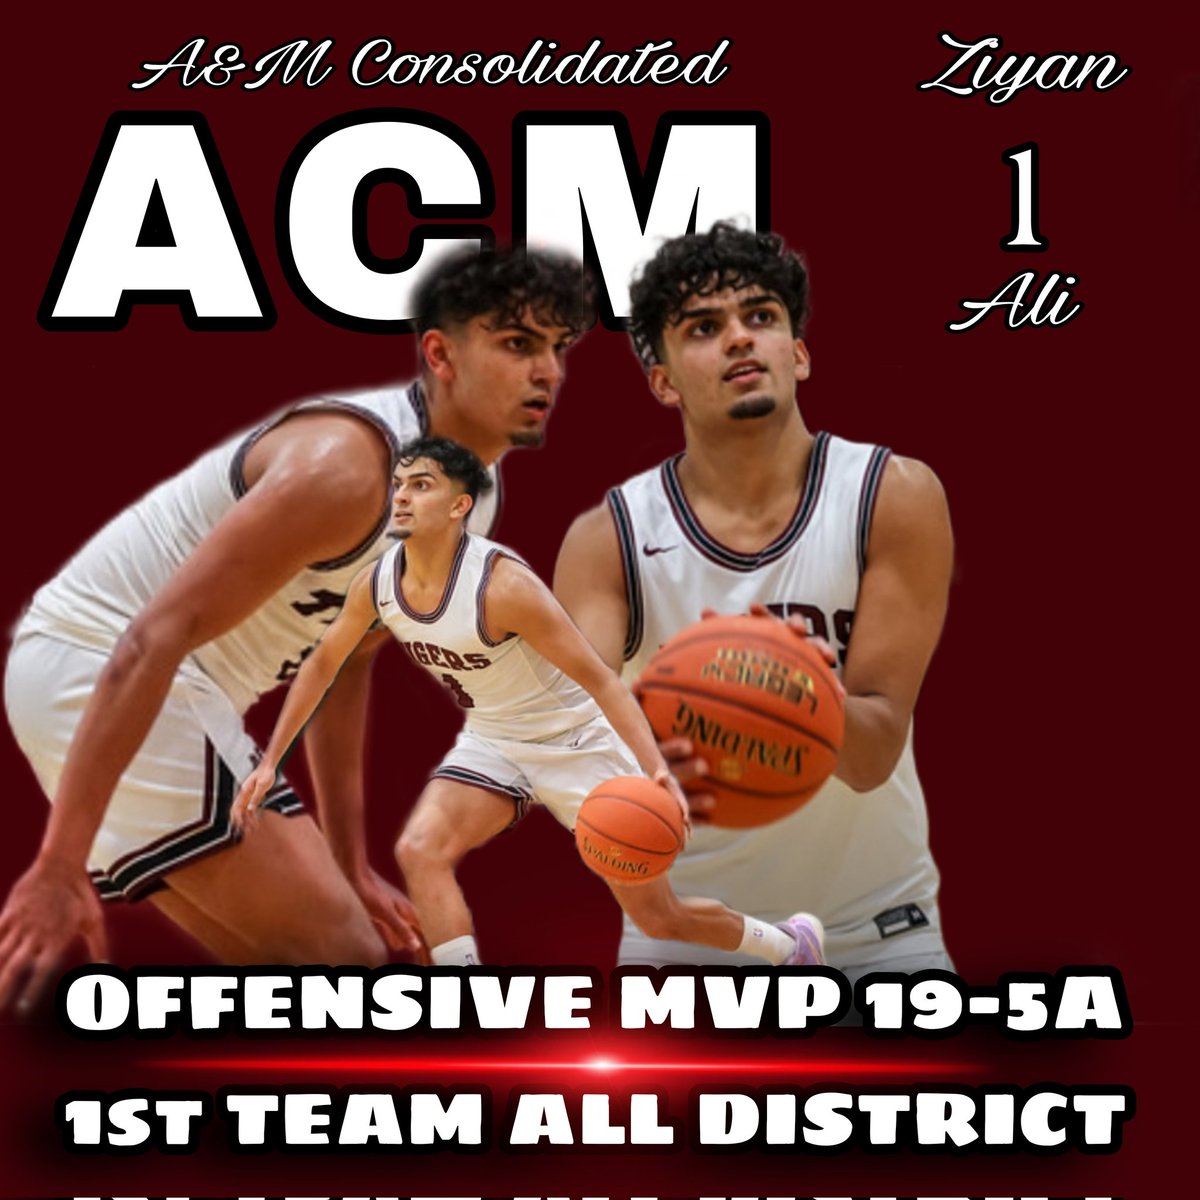 Congratulations to Ziyan Ali @IamZiyanAli for being recognized as 1st Team All District 19-5A and the Most Valuable Offensive Player for District 19-5A!!
#Ten2One #TigerFamily